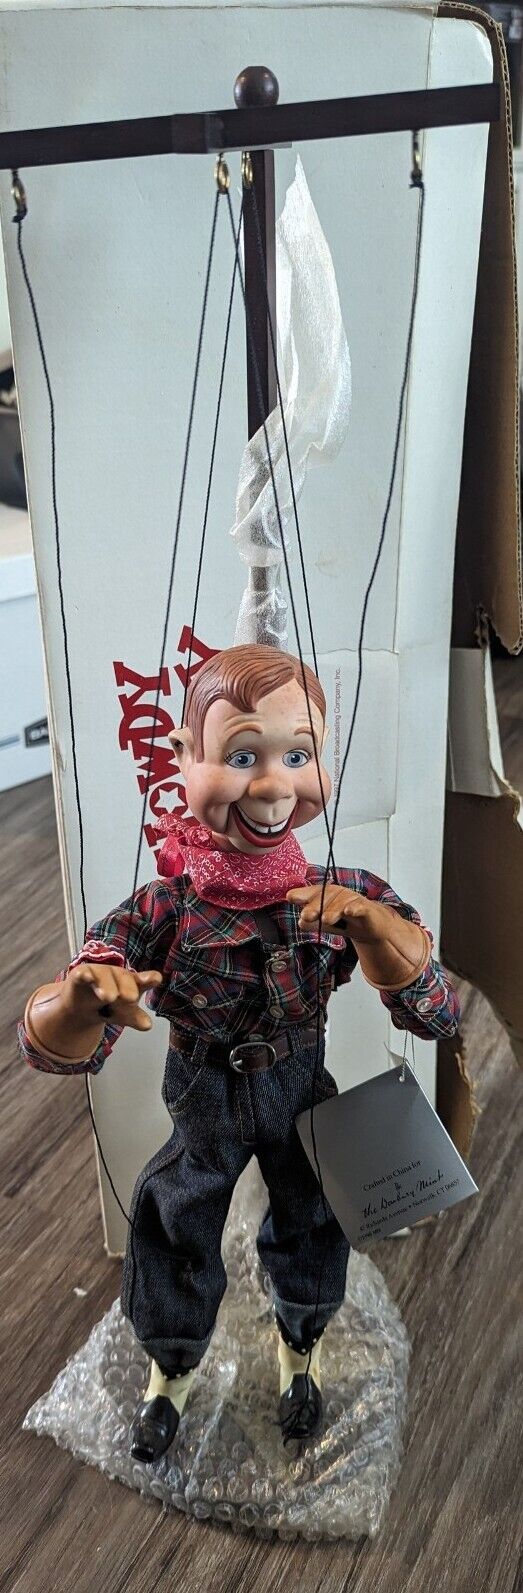 Vtg Howdy Doody Puppet Doll Marionette Danbury Mint Collection 1997 50 Yr Anniv